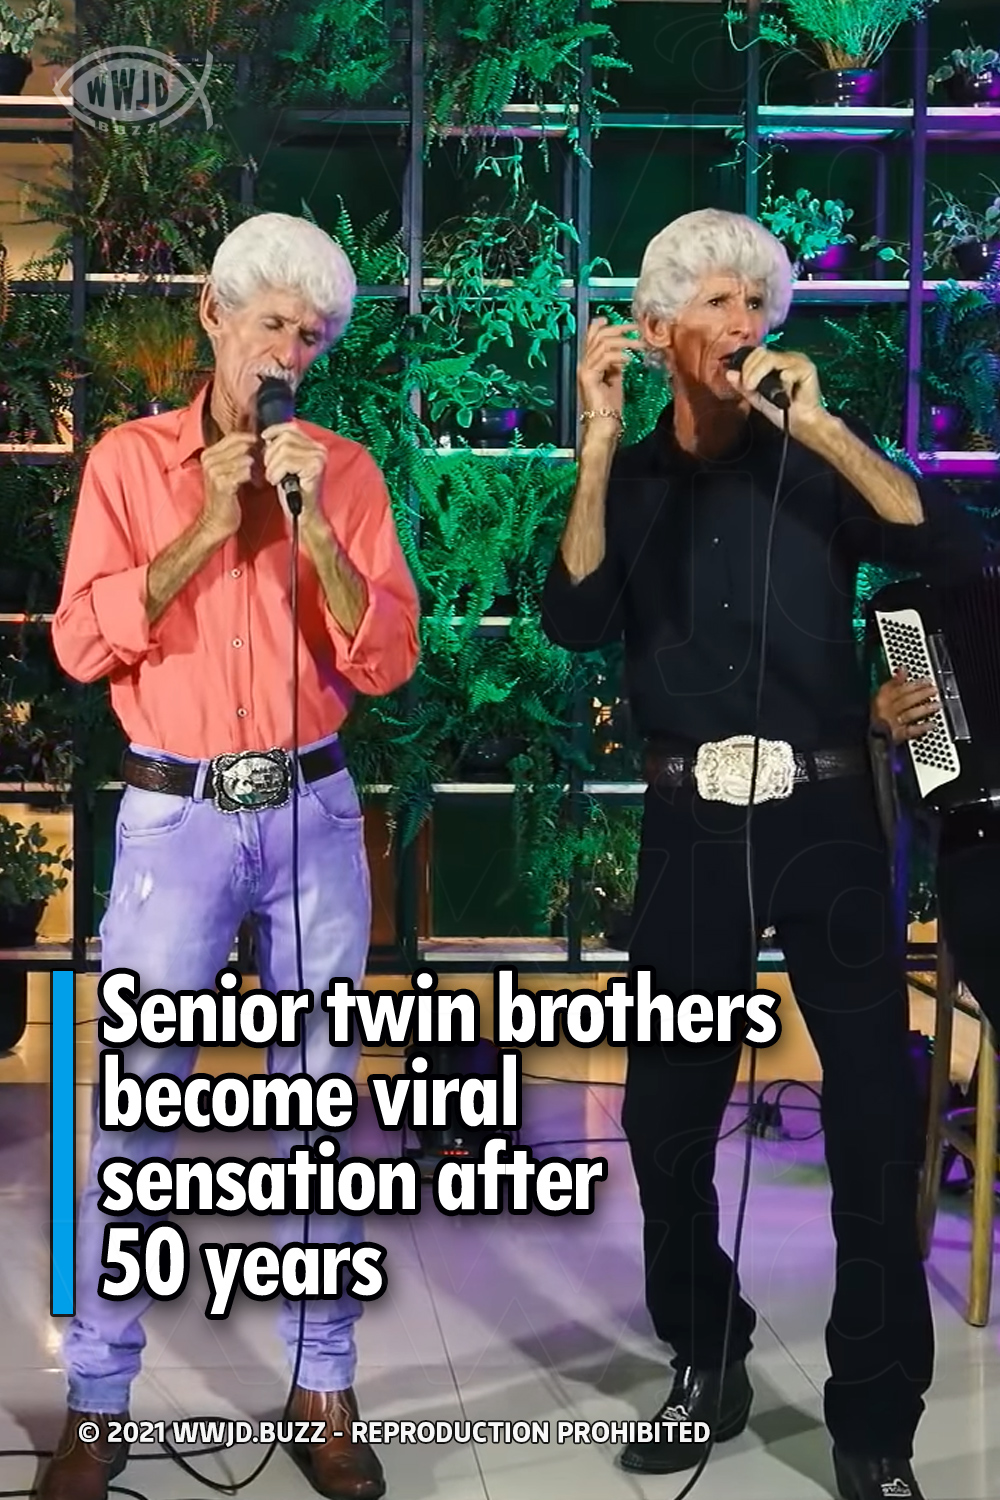 Senior twin brothers become viral sensation after 50 years